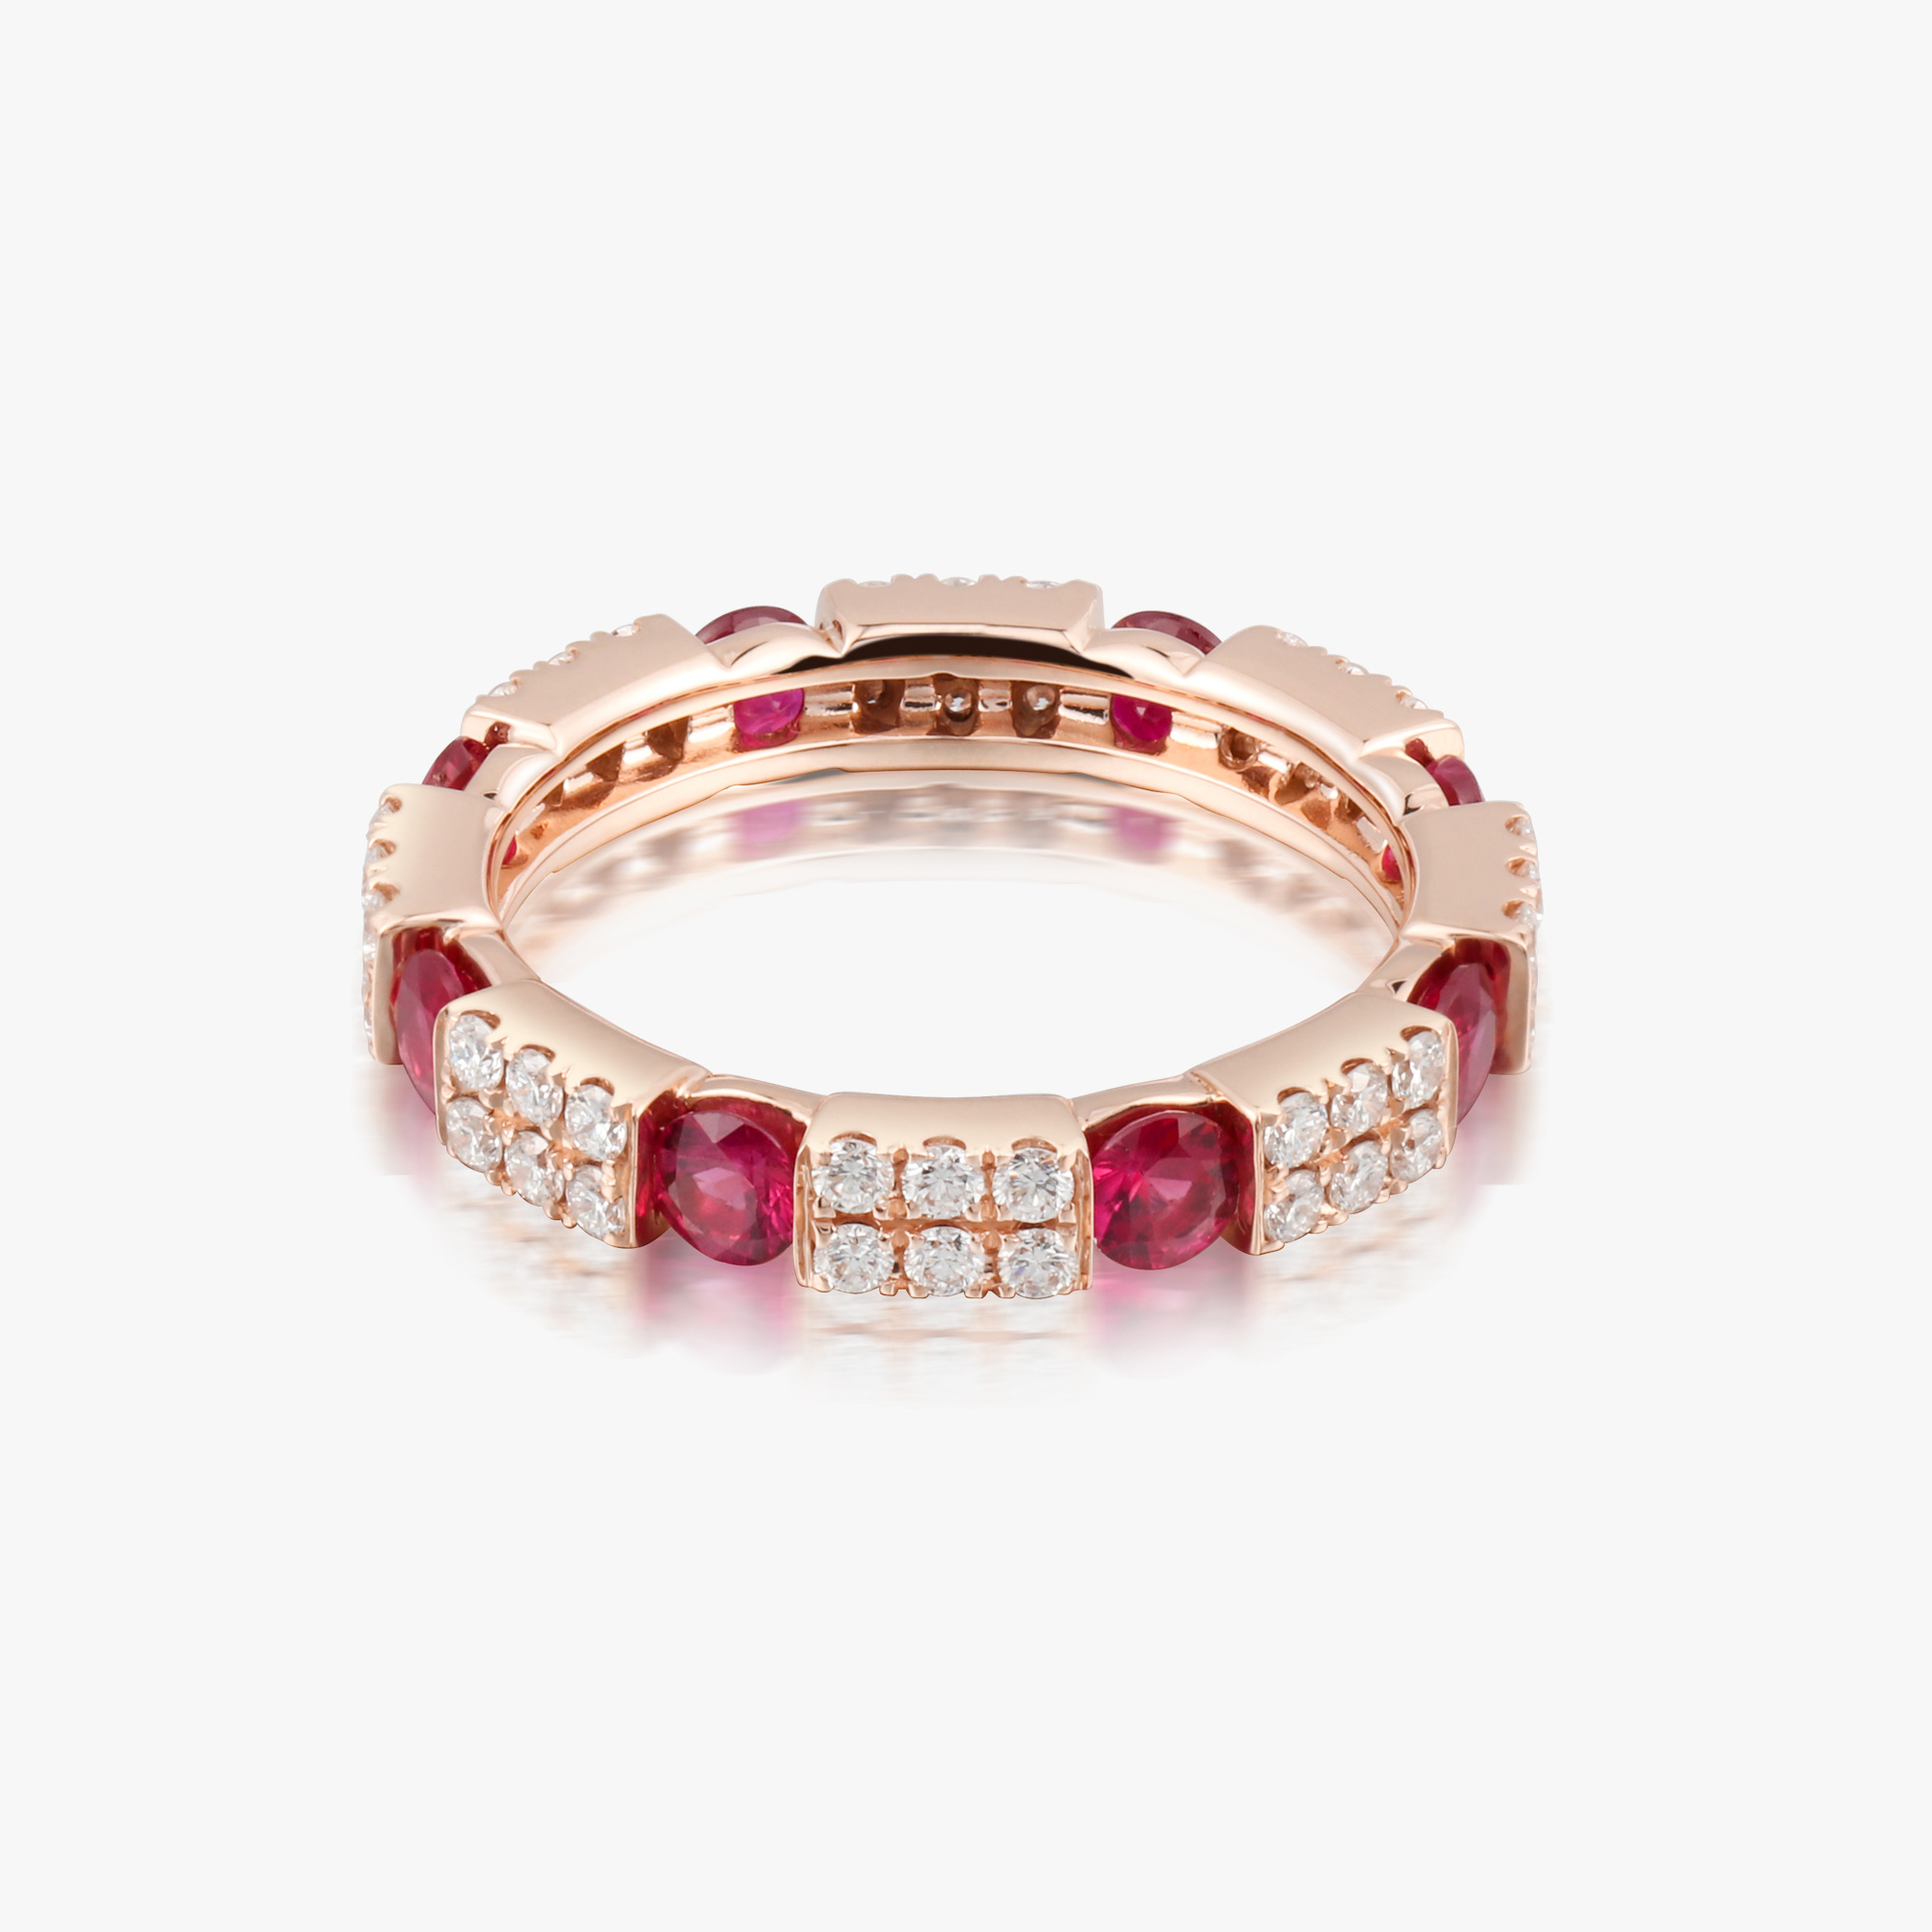 ACCA 14KR Ring with Ruby and Diamond